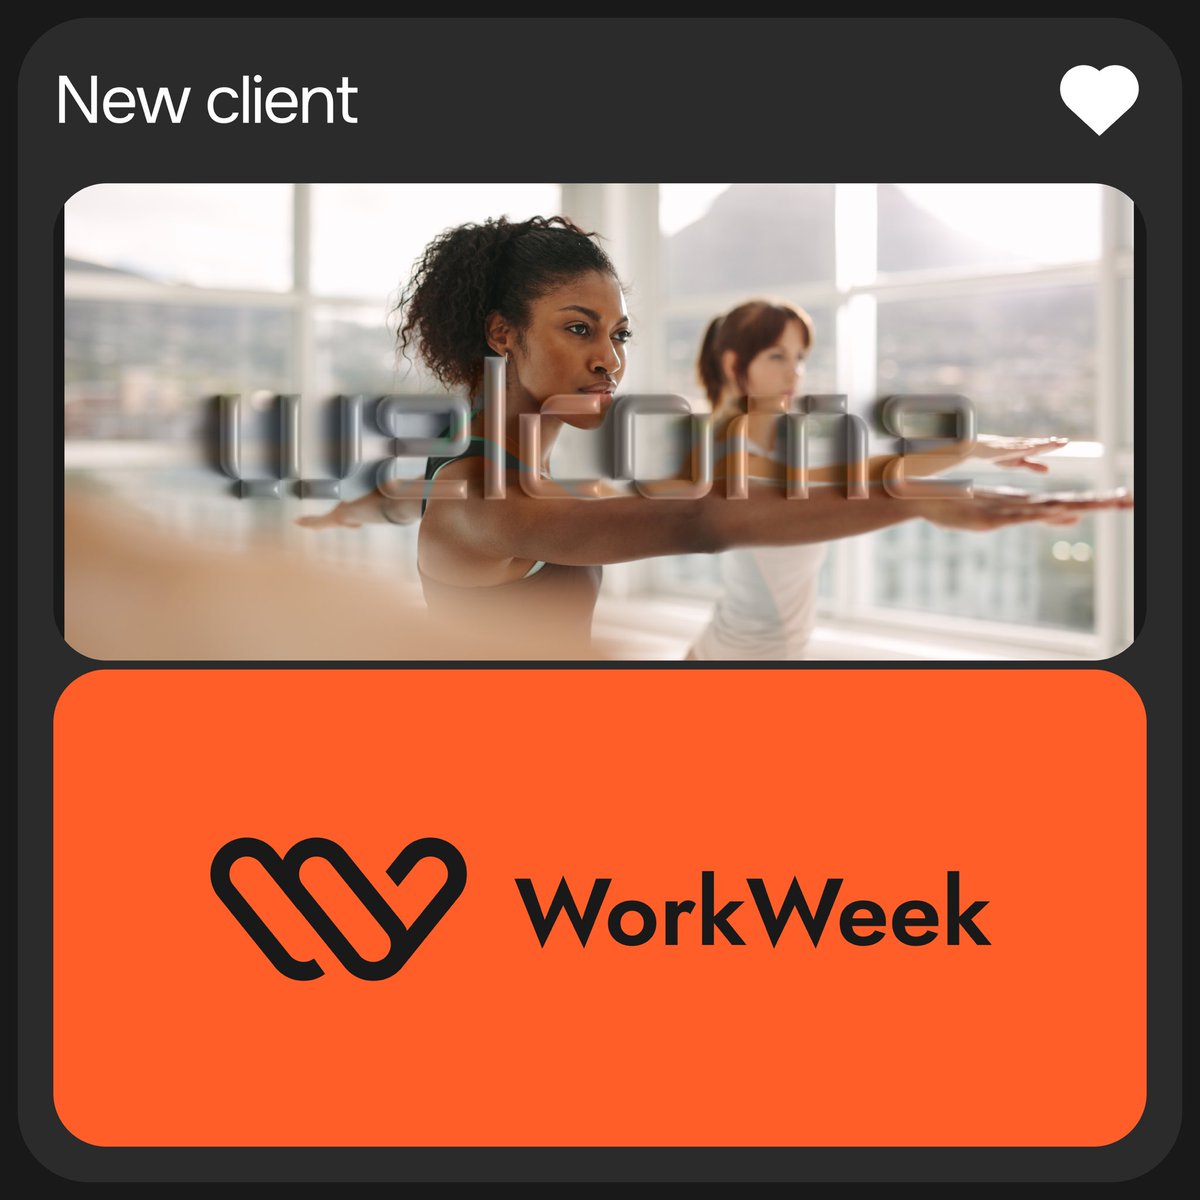 We are thrilled to be working with the WorkWeek team! 

#strove #employeewellbeing #health #wellbeing #healthtech